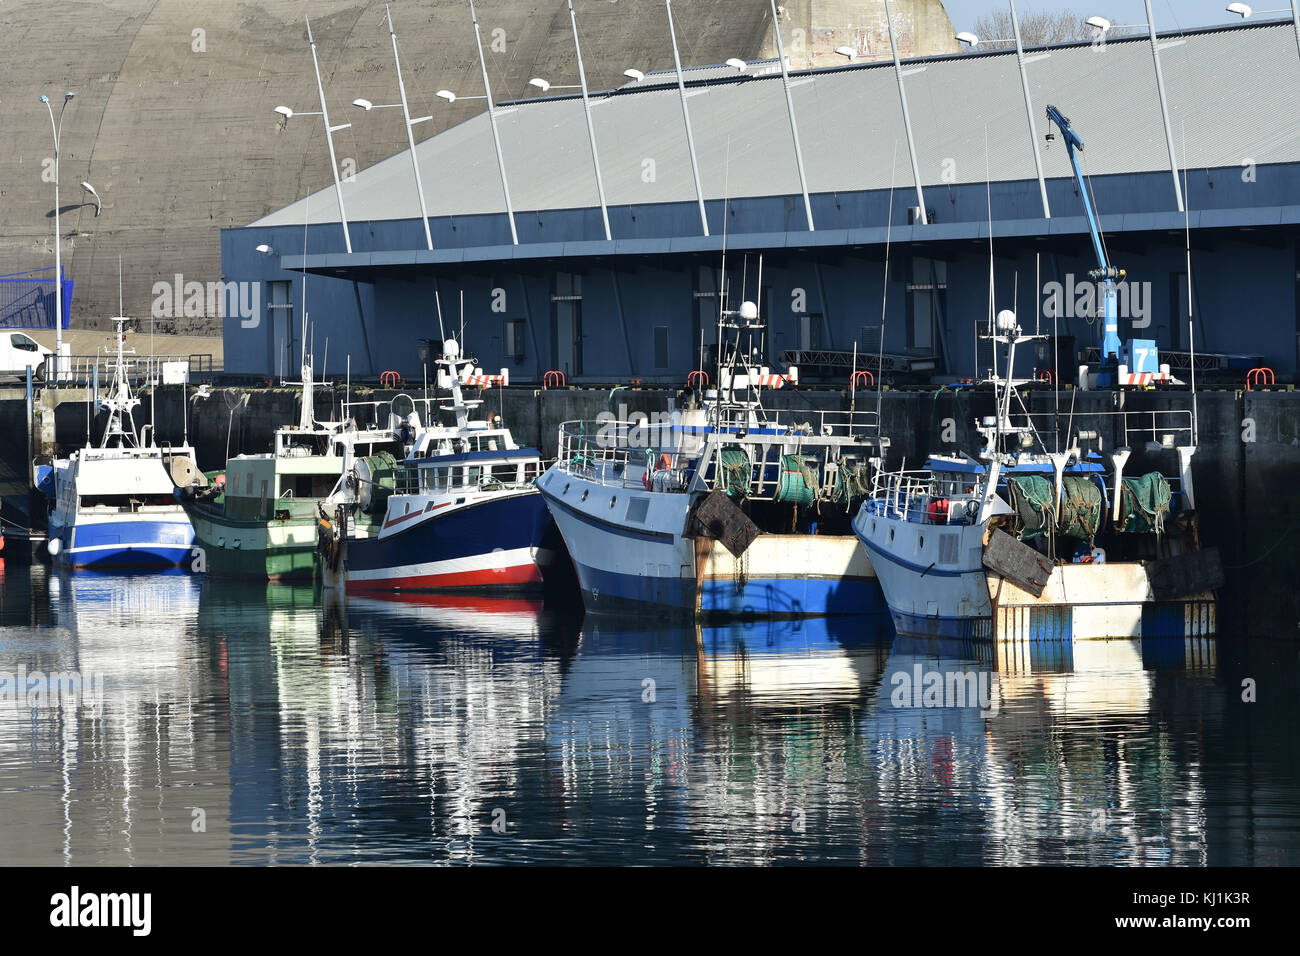 Fishing boats docked at Keroman wharf, Lorient, Brittany, France. Horizontal three-quarter stern view with warehouse in background Stock Photo